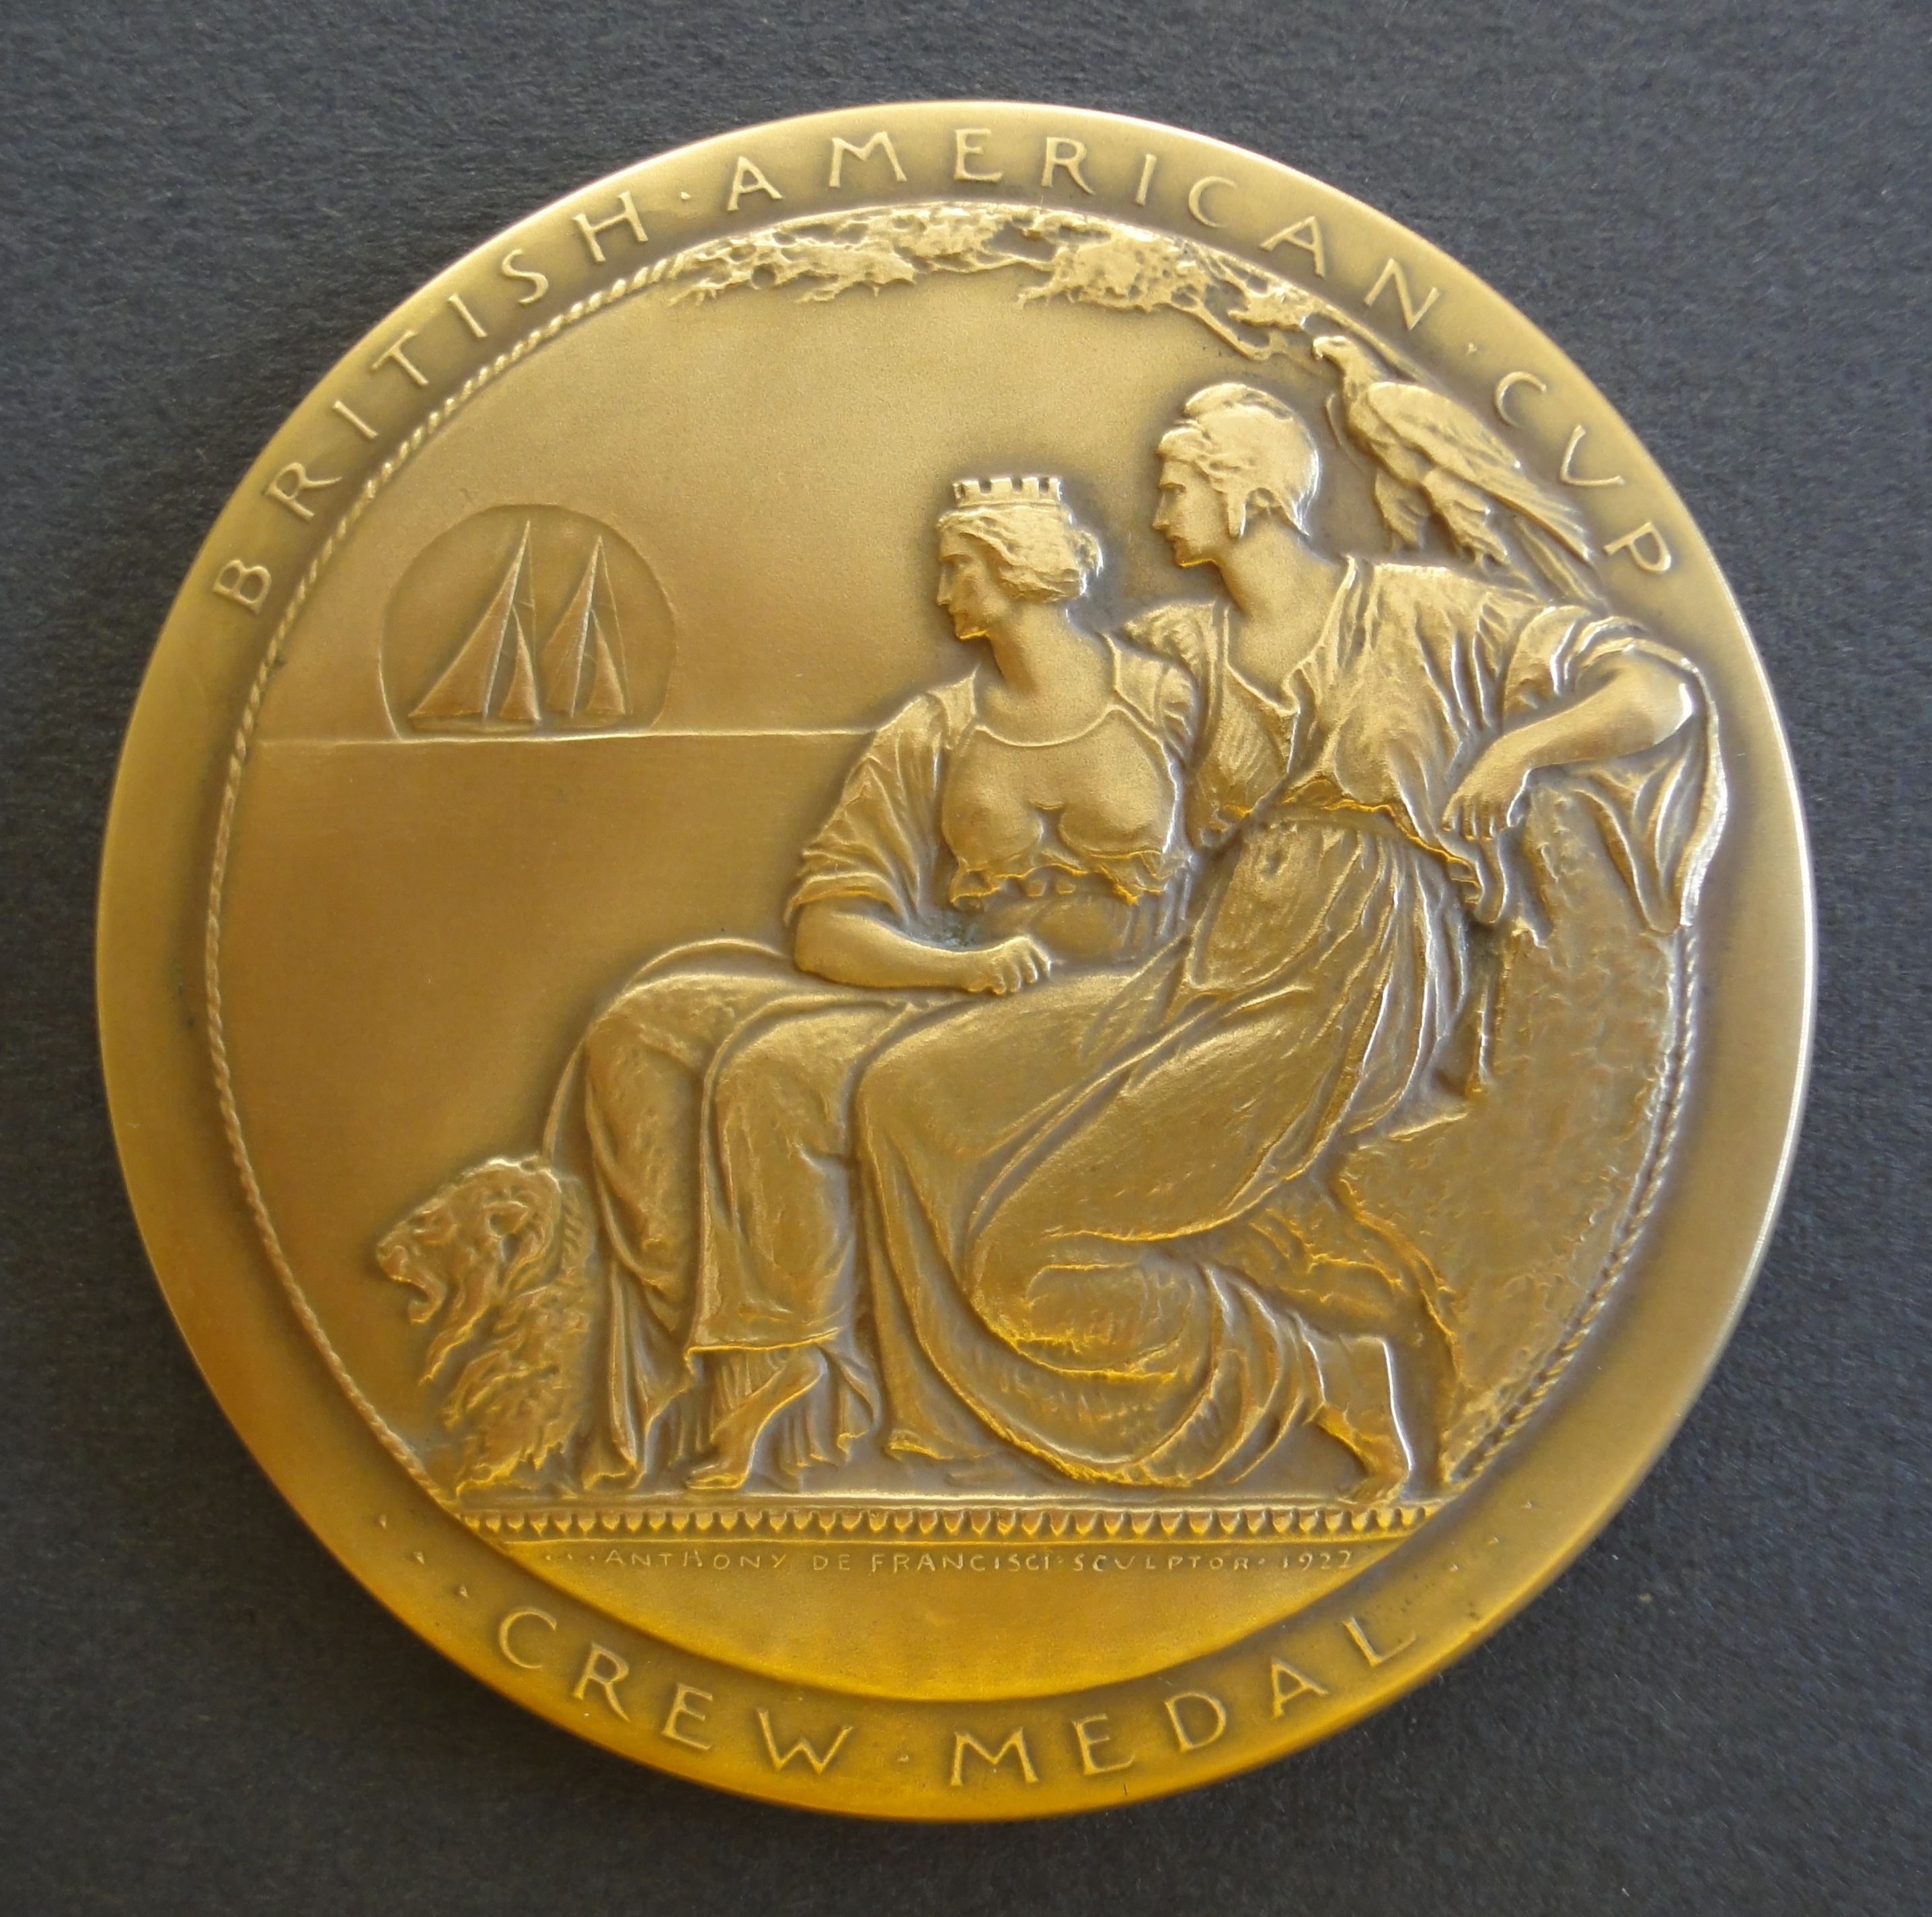 Obverse of medal with two seated female figures watching sailing boats.